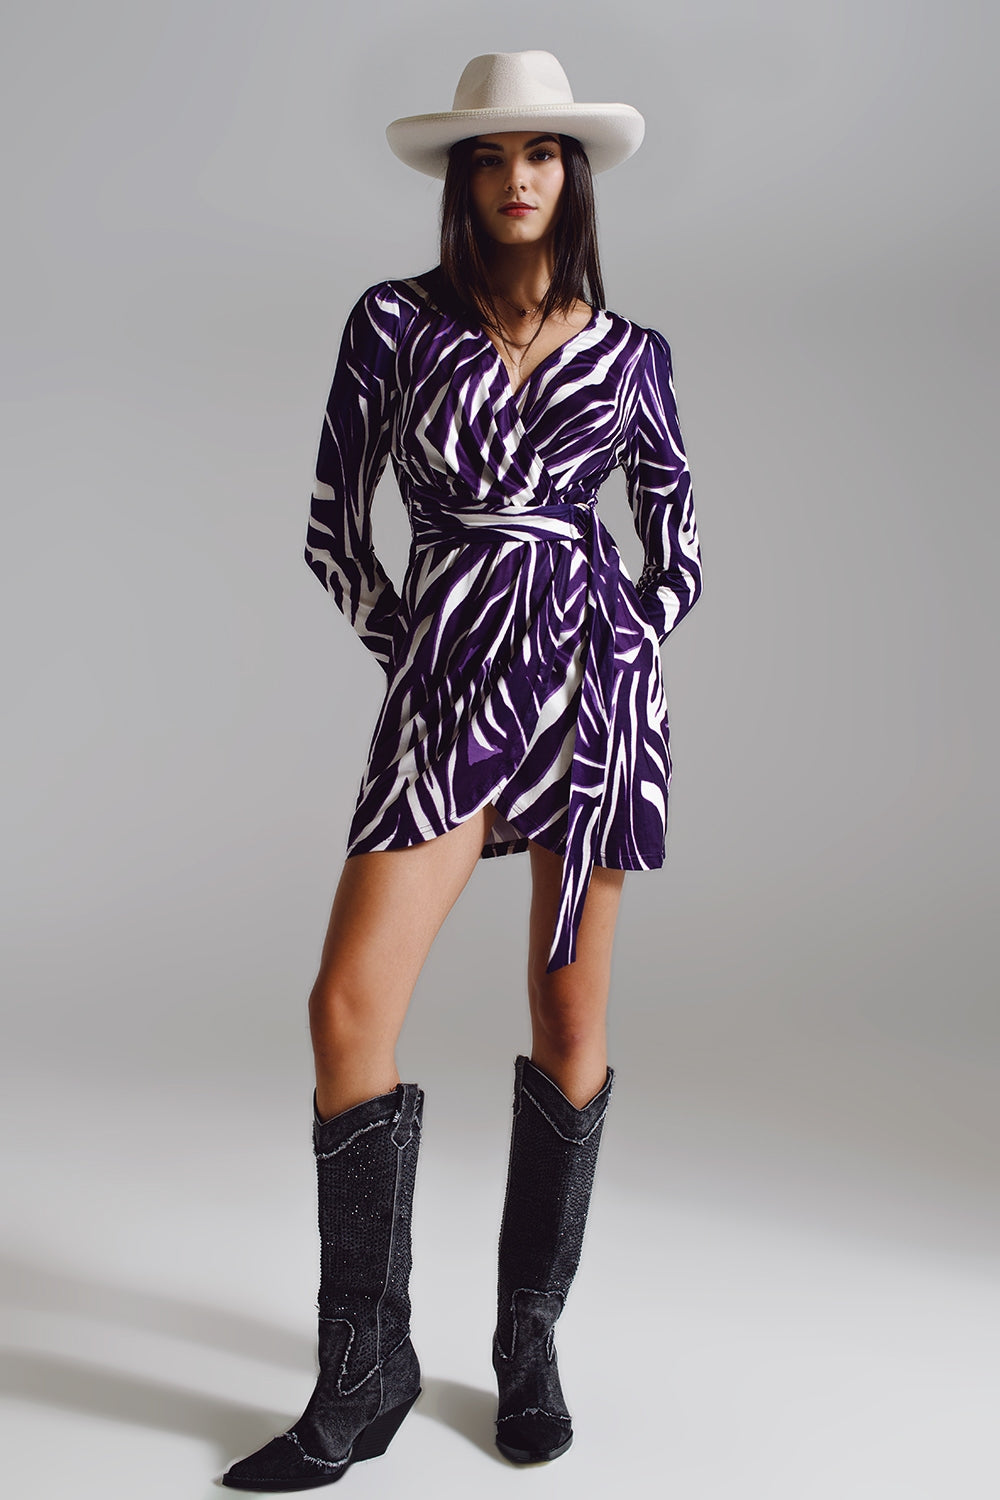 Q2 Wrapped Long Sleeve dress With Belt in Cream and Purple Zebra Print